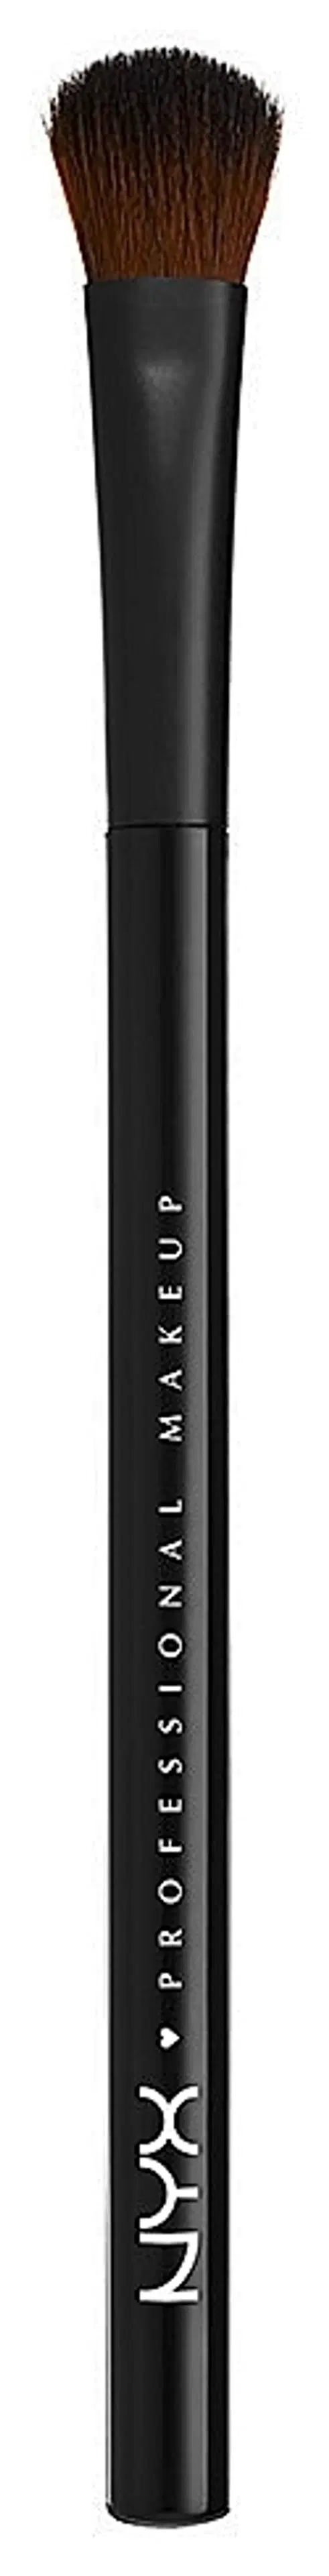 NYX Professional Makeup Pro Brush All Over Shadow luomivärisivellin